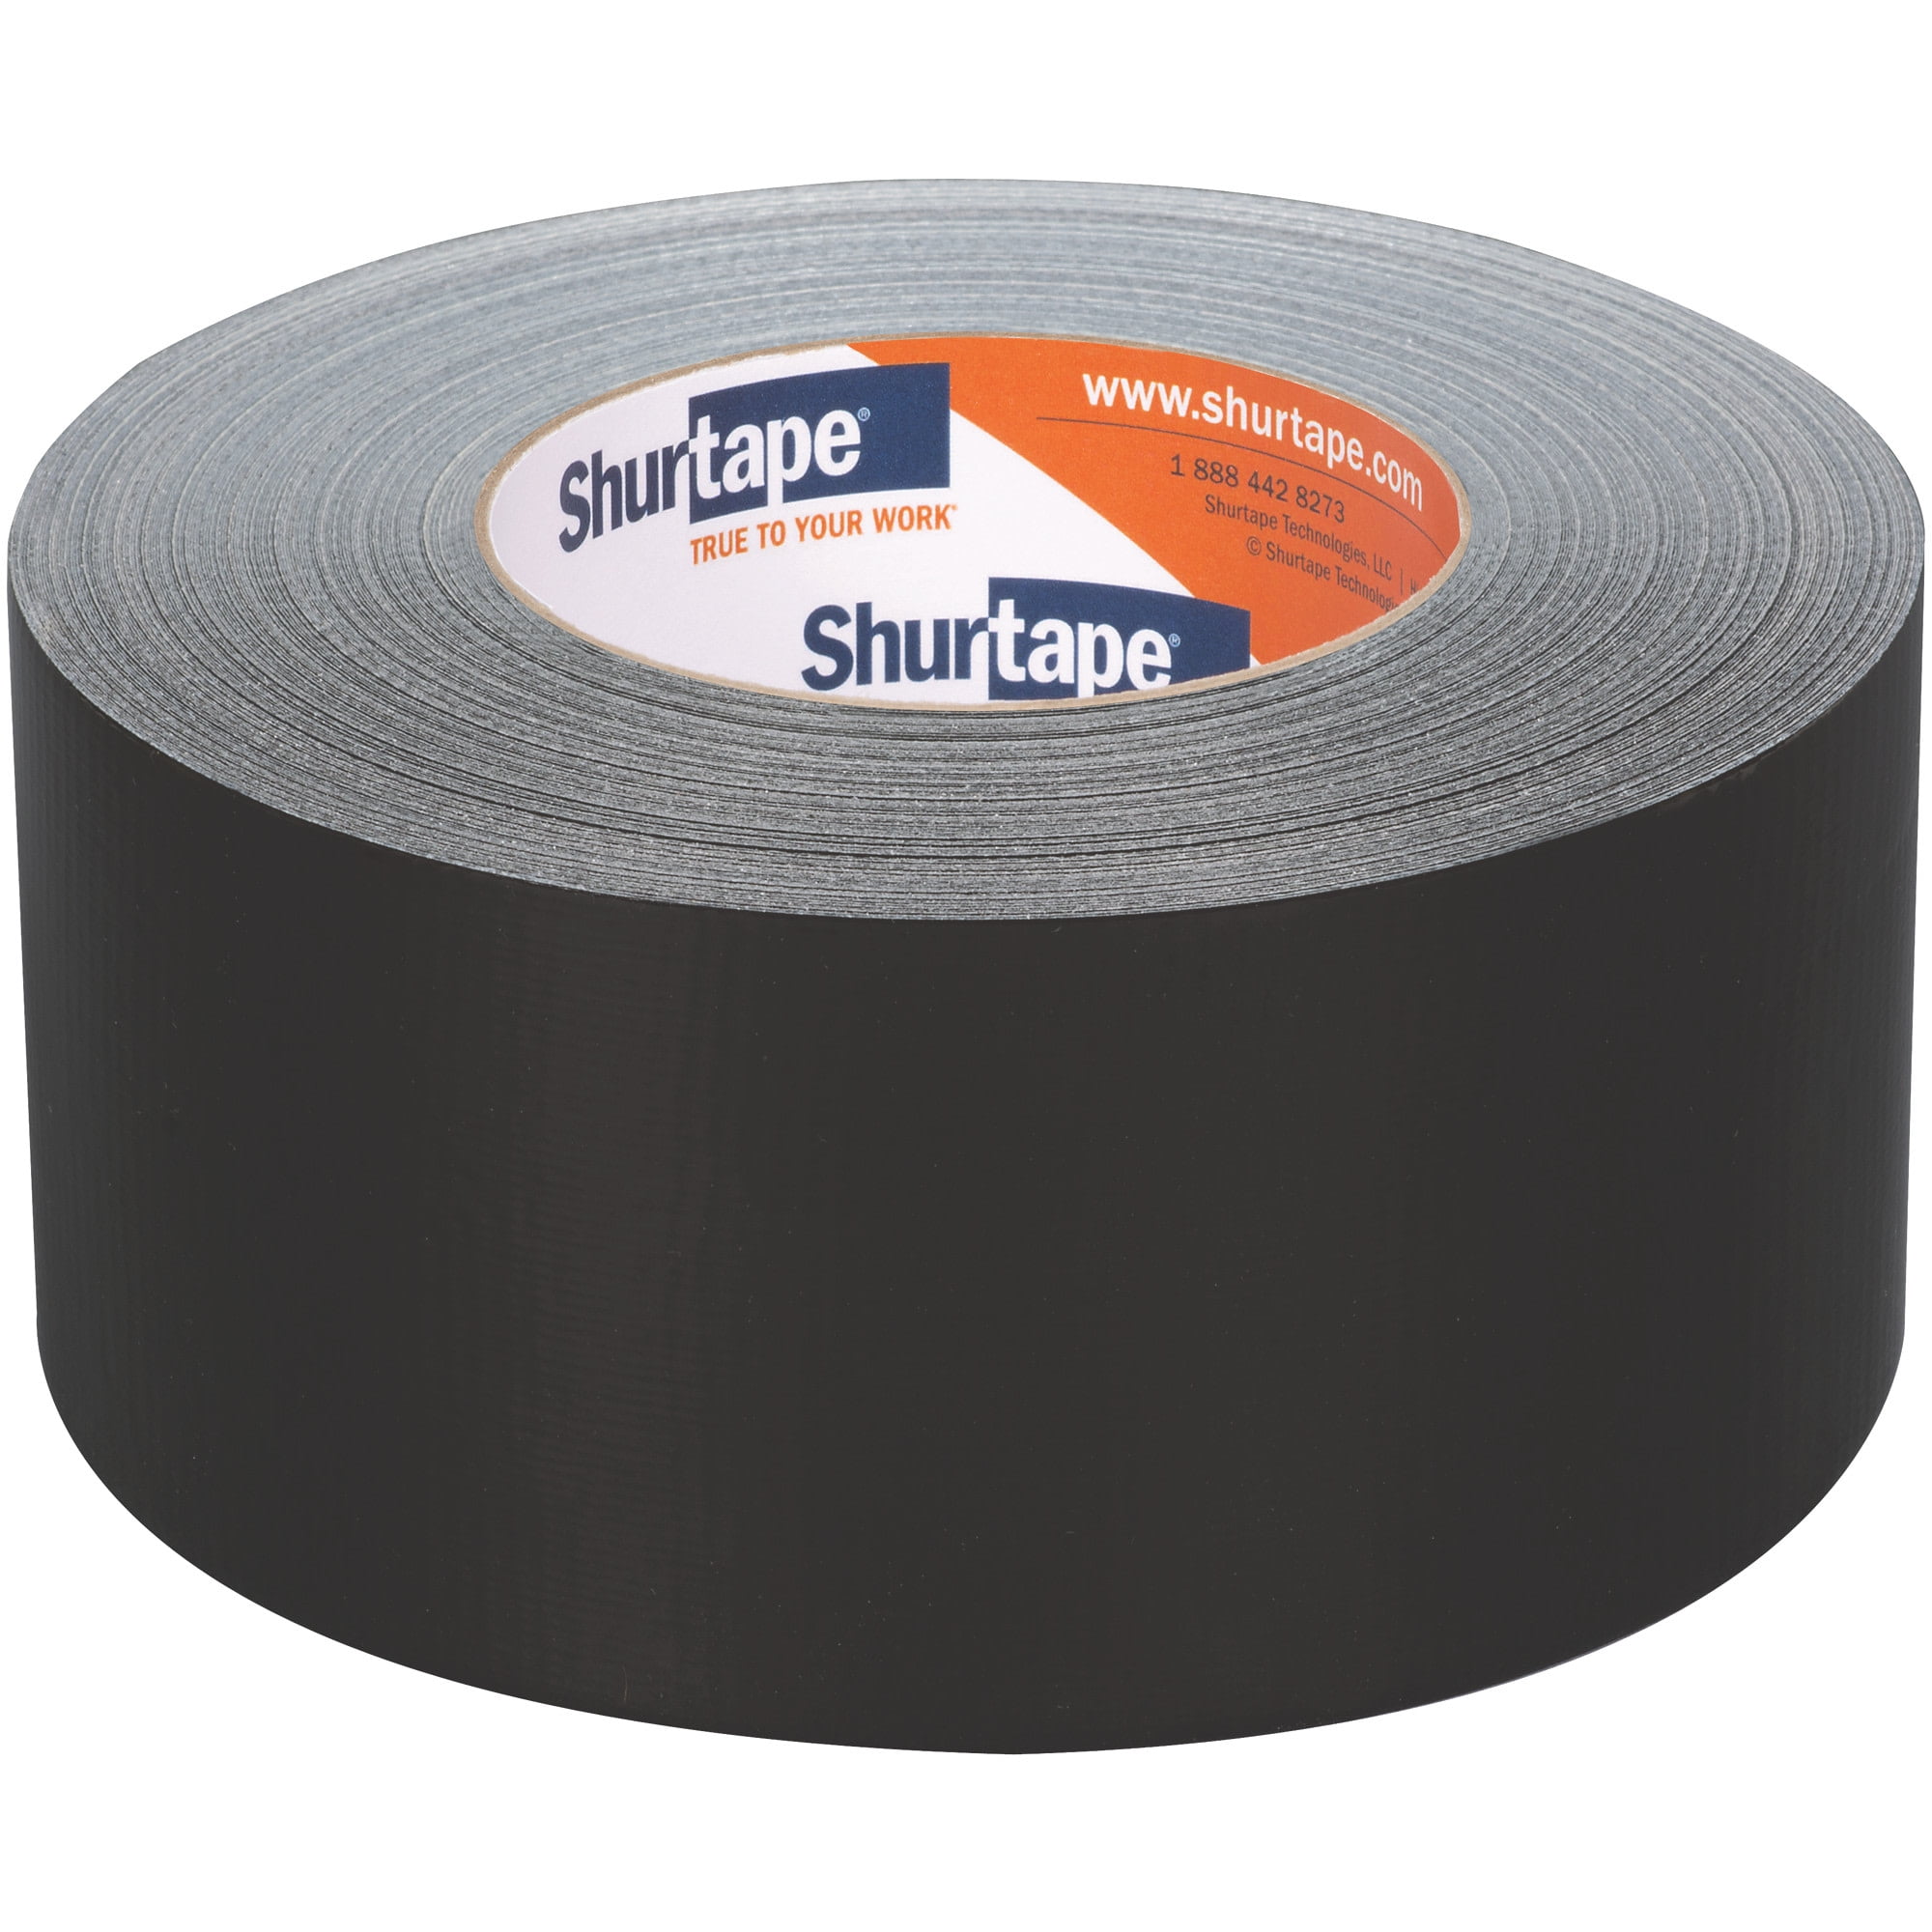 PC 618 Performance Grade, Colored Cloth Duct Tape - Shurtape